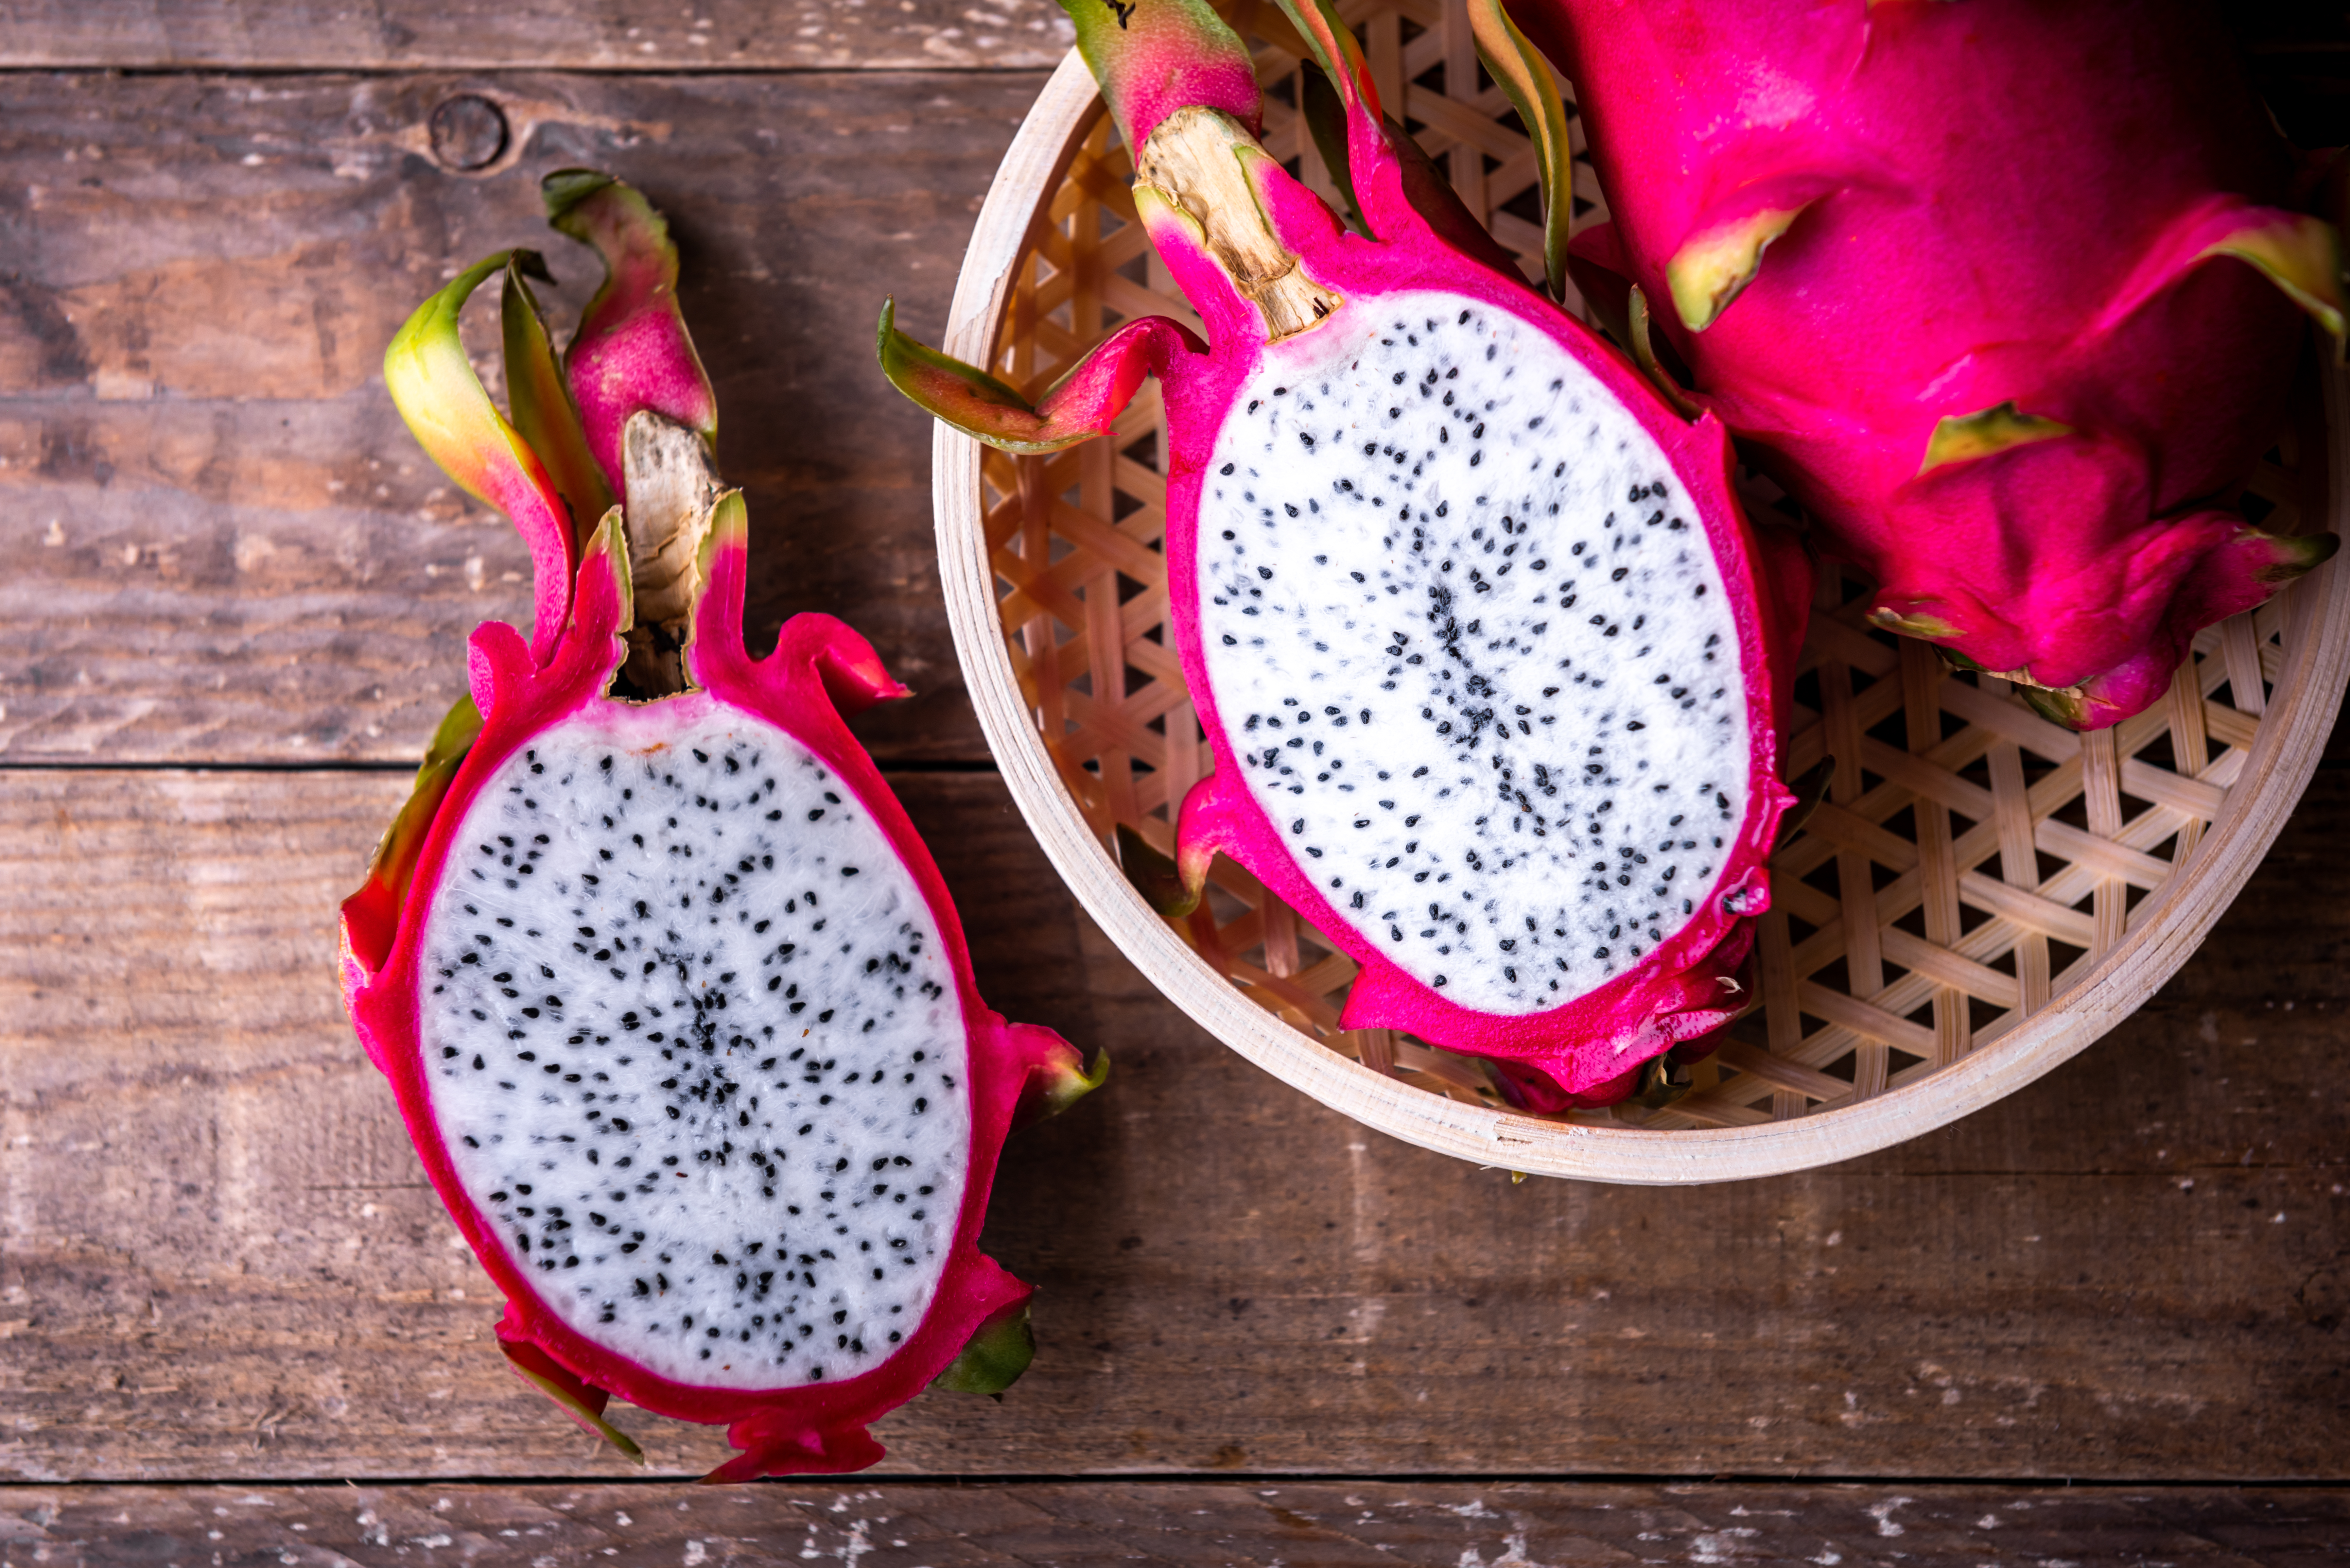 Dragon fruit | Source: Getty Images